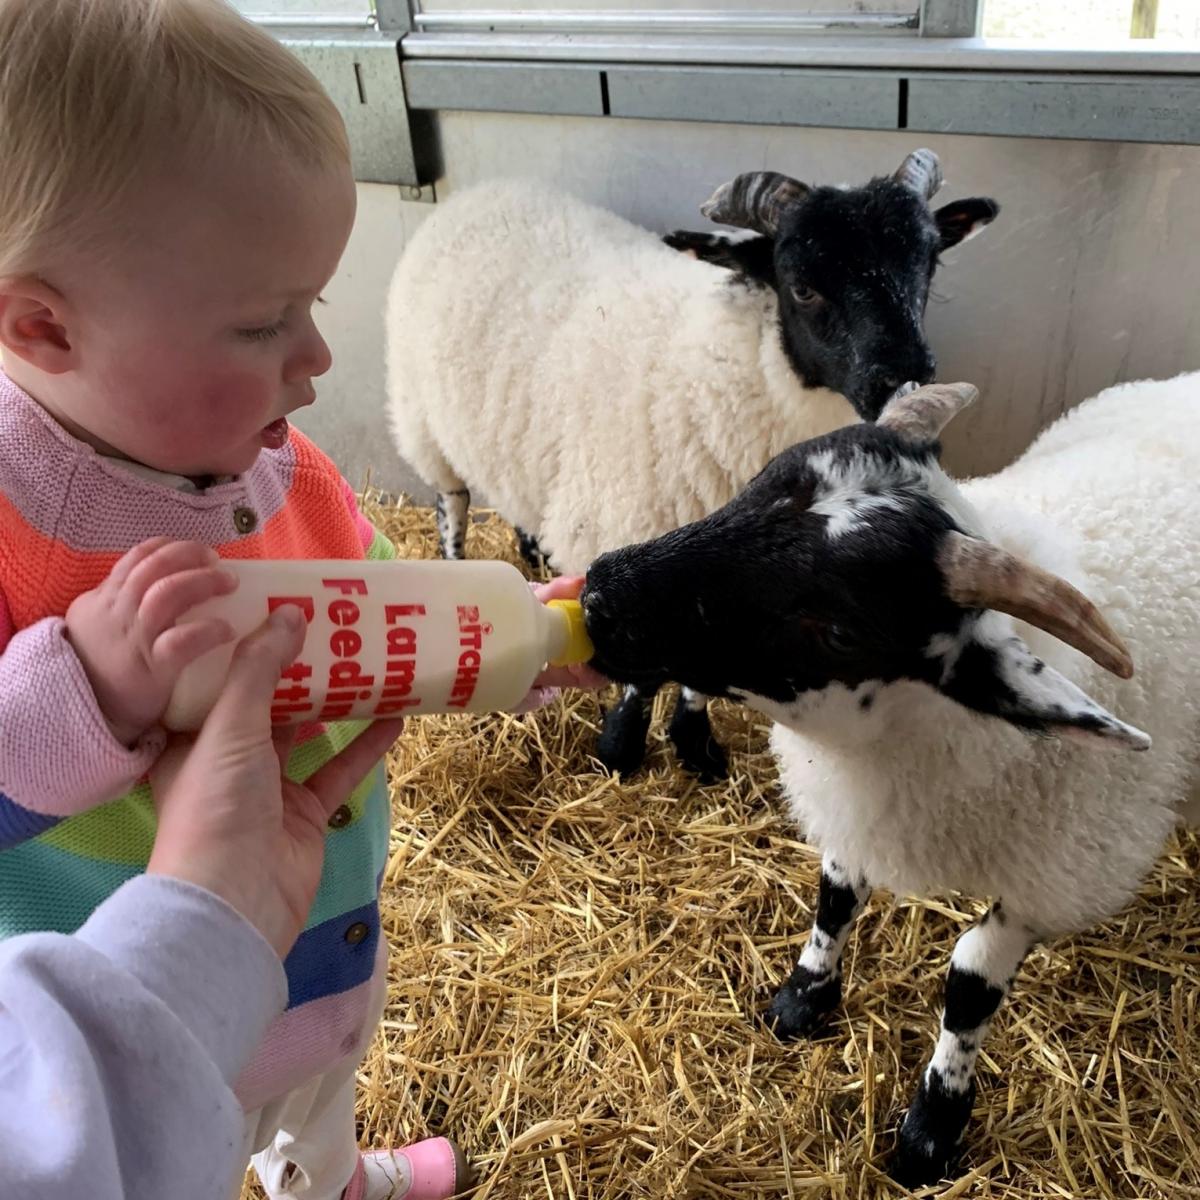 Abigail Webber - Ellie (age 1) making sure the pet lambs take all of their bottle